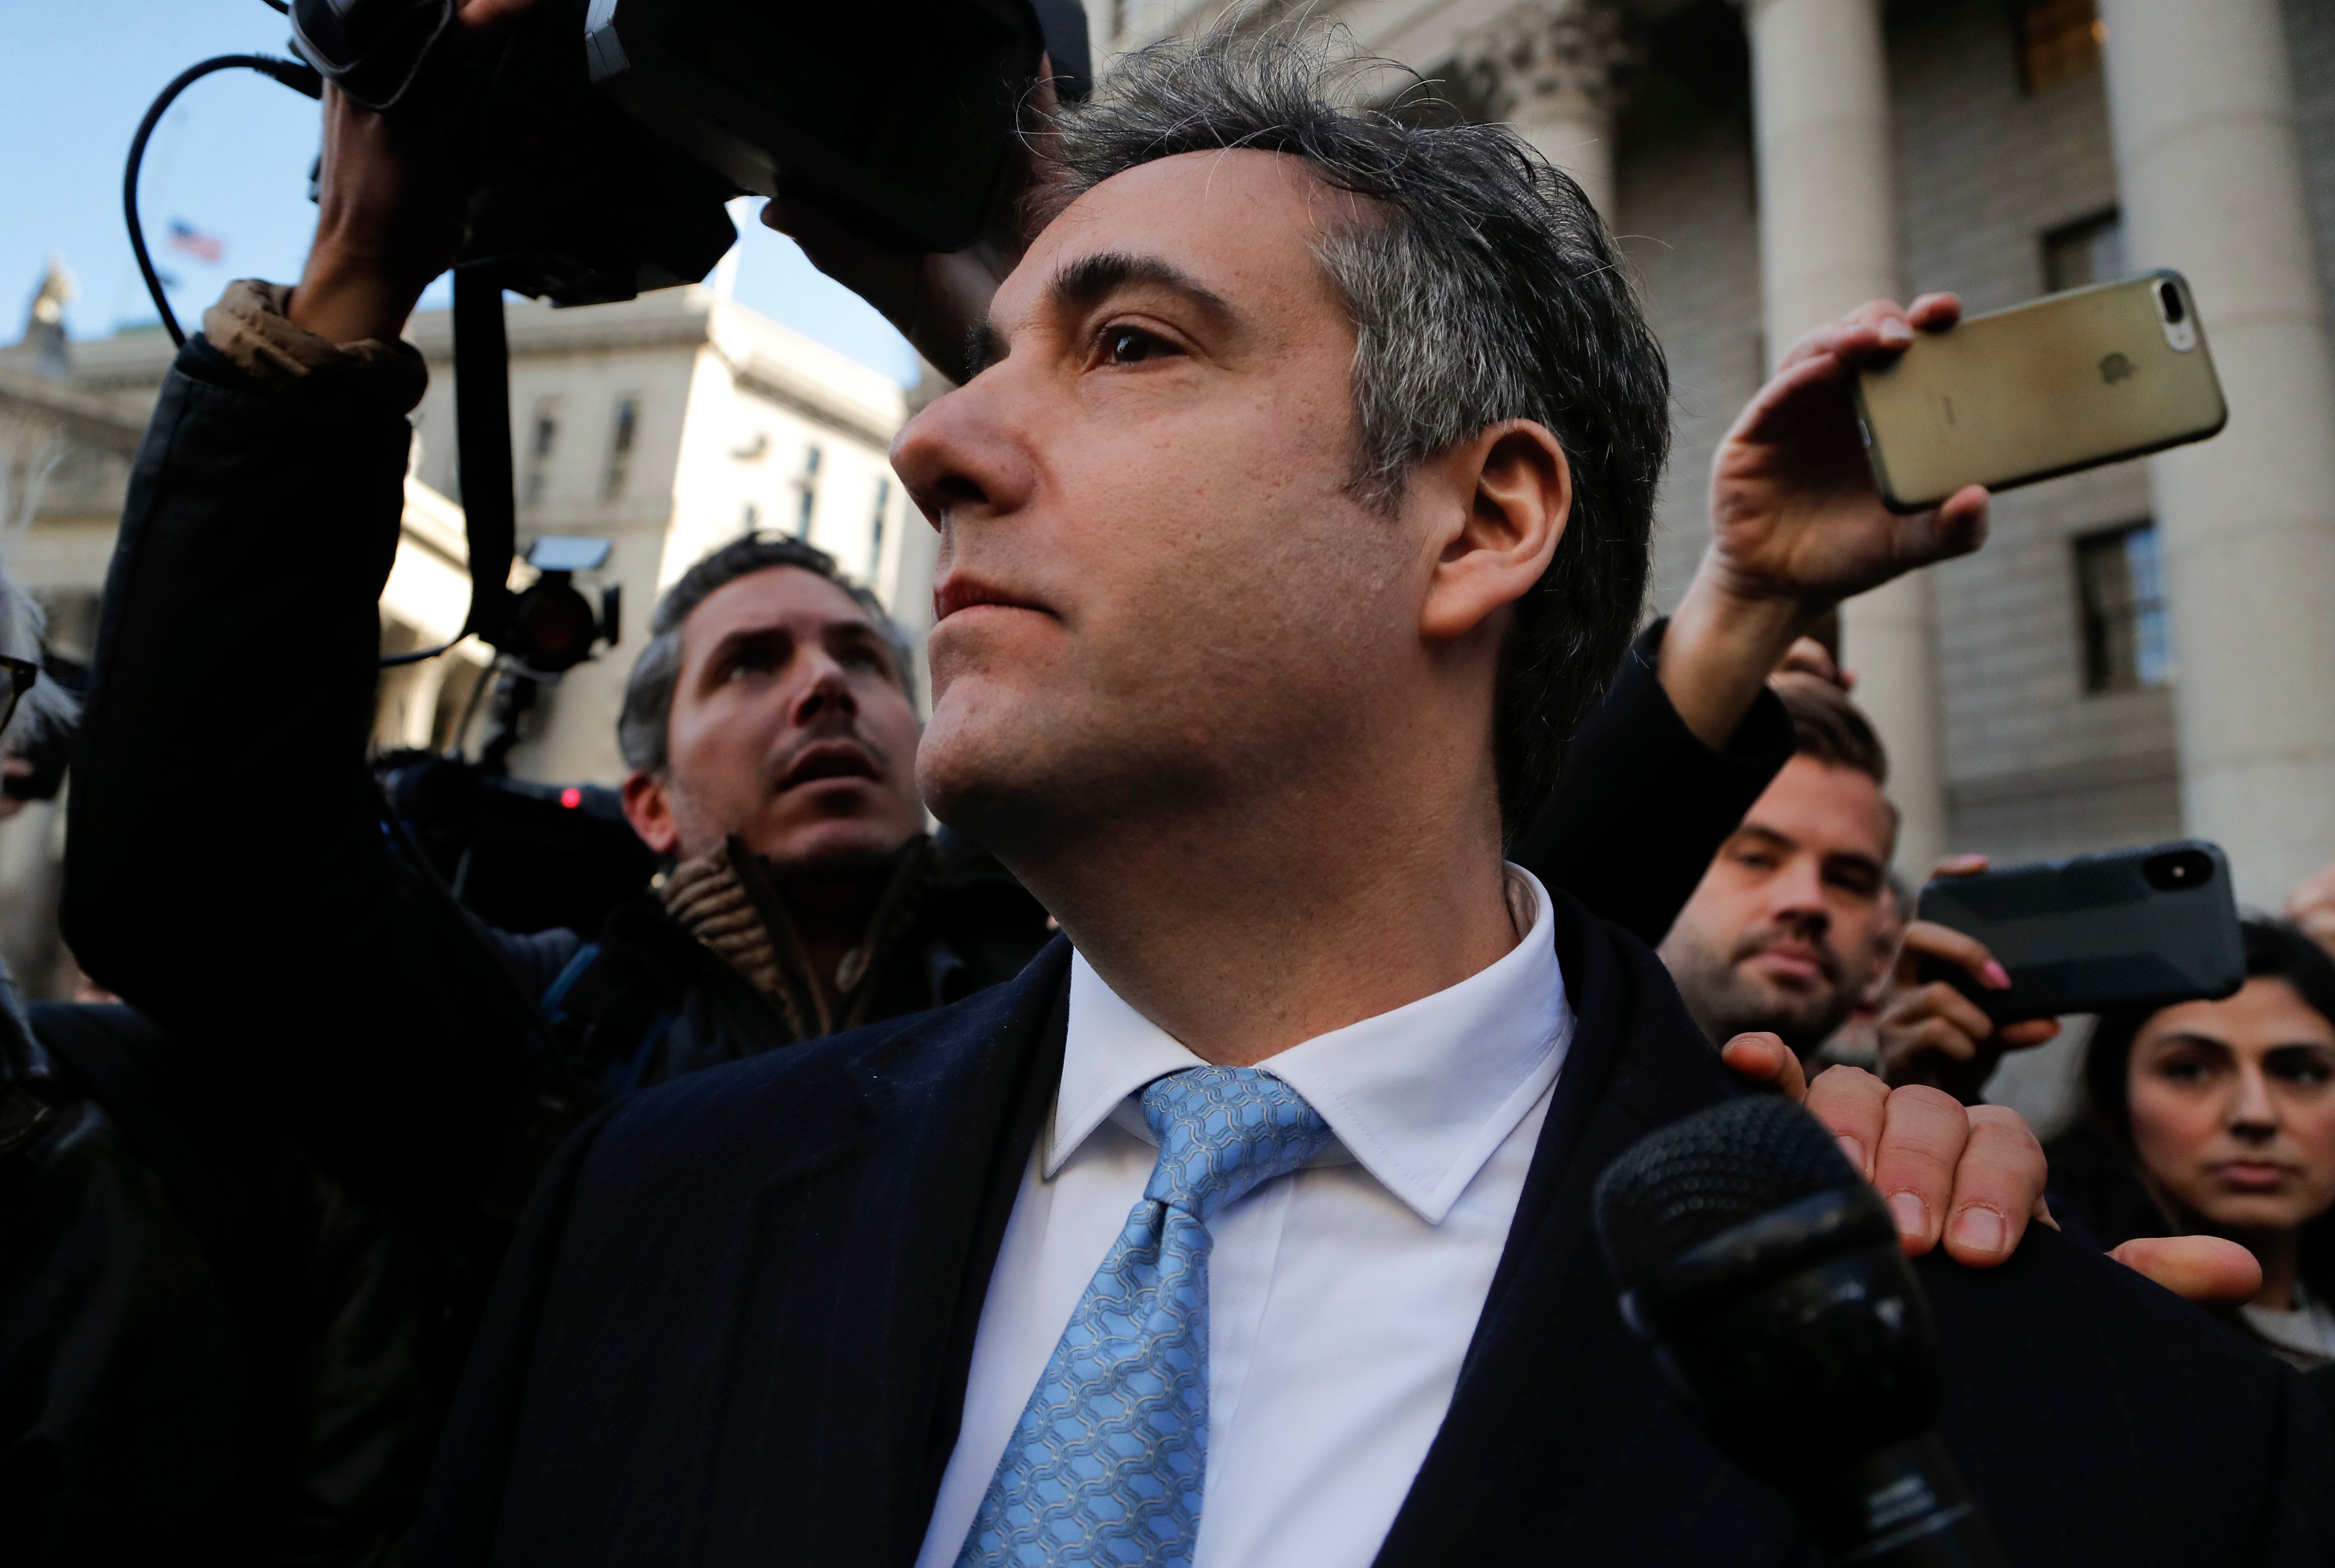 Michael Cohen walks out of federal court, in New York, after pleading guilty to lying to Congress about work he did on an aborted project to build a Trump Tower in Russia, on Nov. 29, 2018. (Julie Jacobson—AP/REX/Shutterstock)